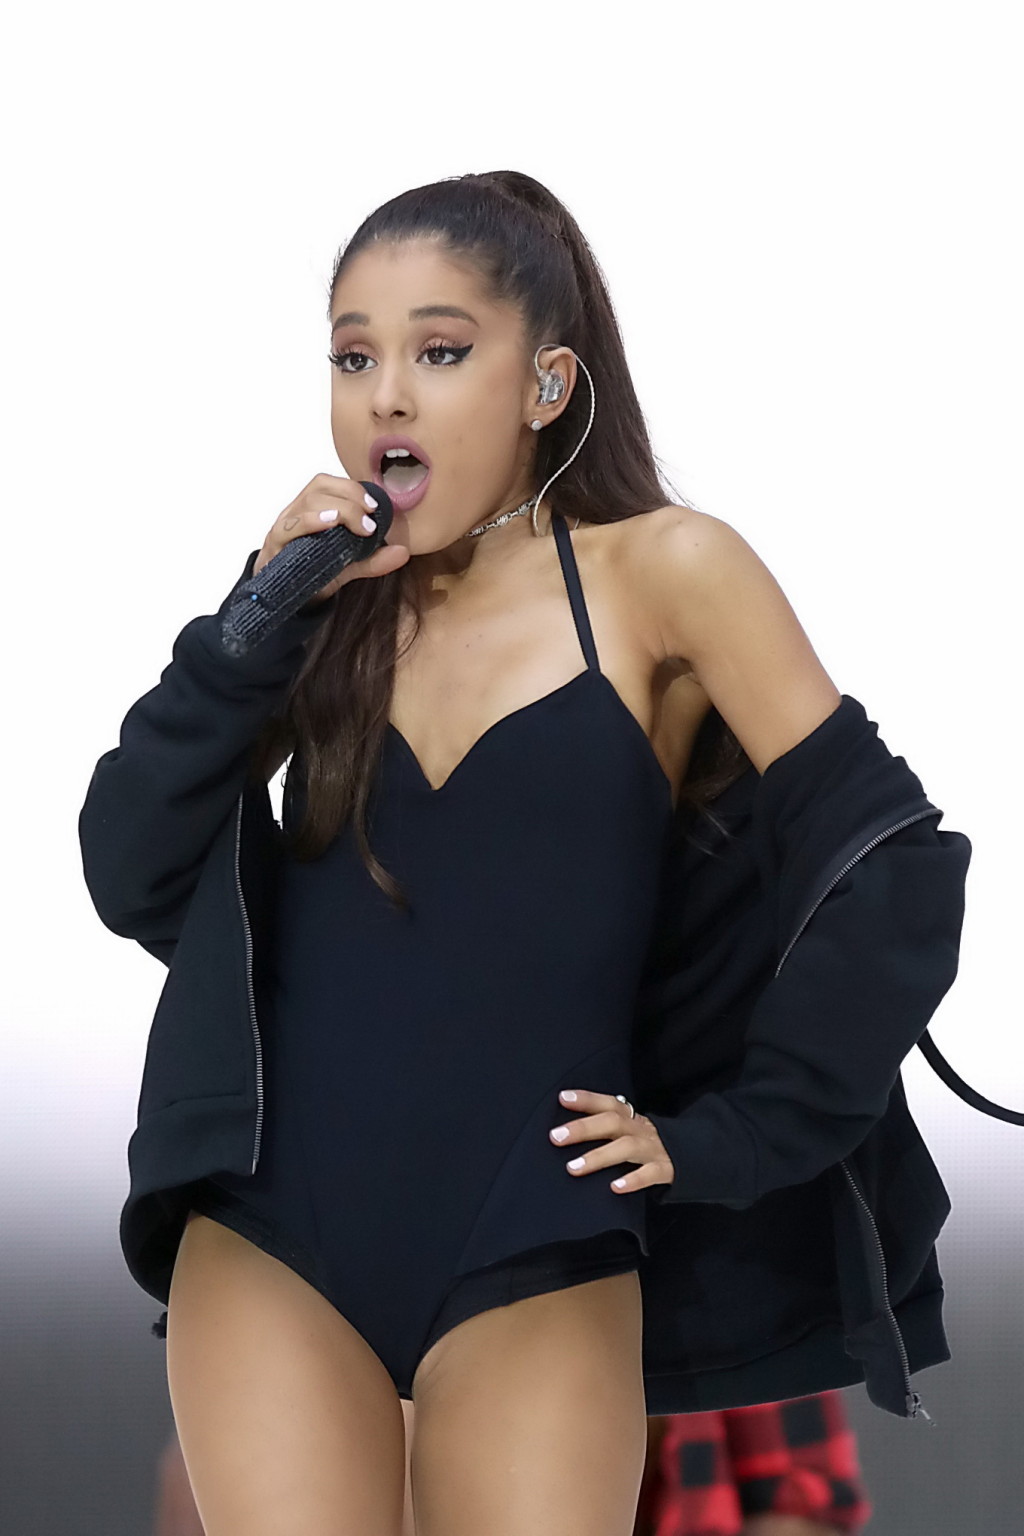 Ariana Grande Shows Off Her Shaved Pussy In A Tiny Black Outfit While